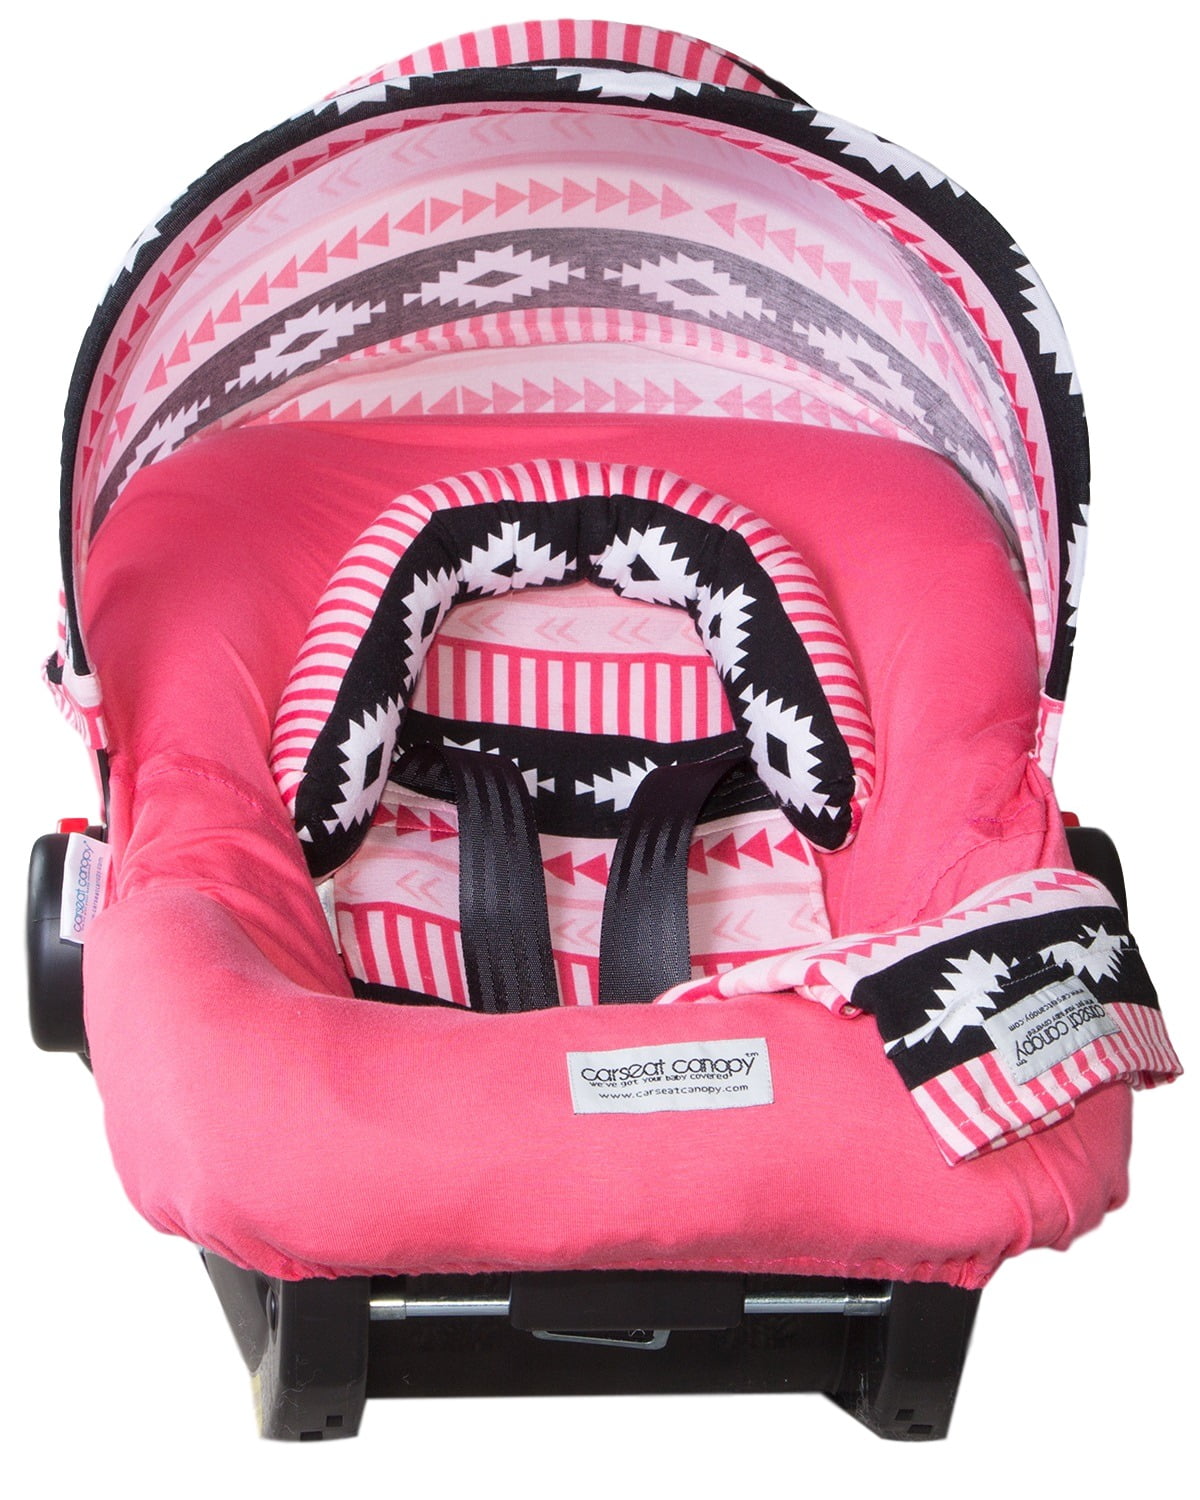 Carseat Canopy Baby Whole Caboodle Baby Car Seat Cover for Car Seat,5